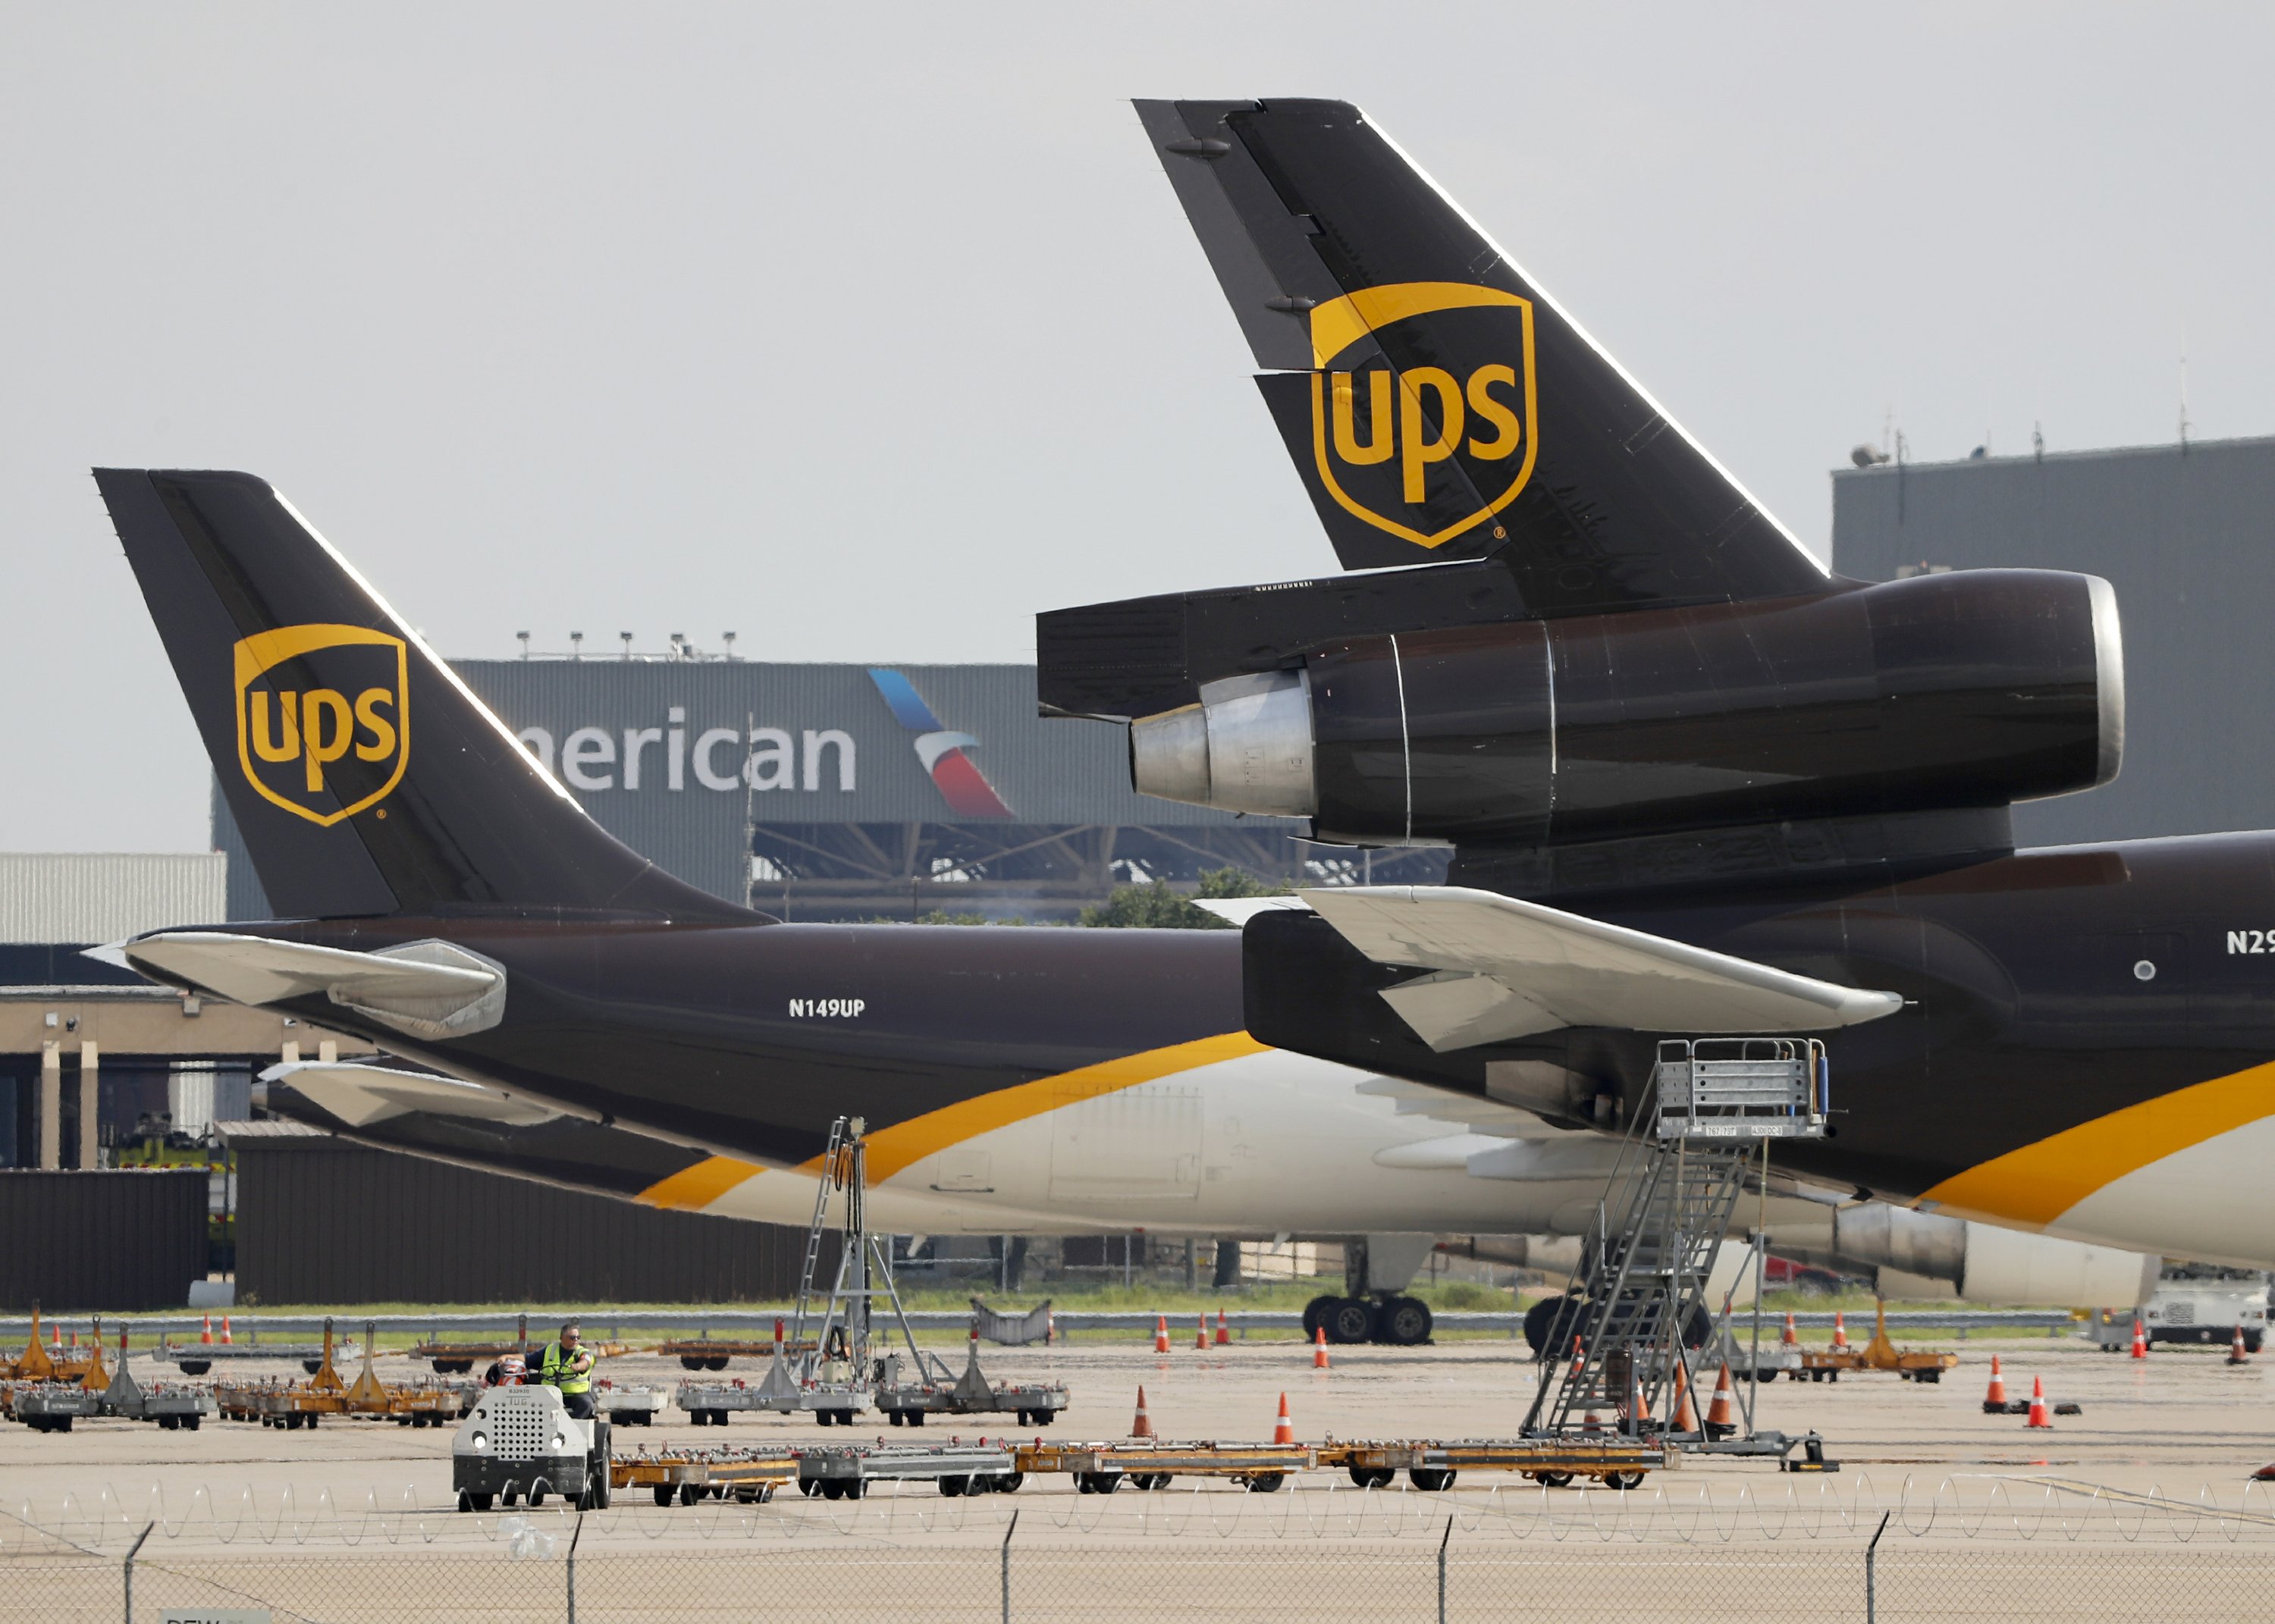 UPS adds pickup spots at retailers, seeks to fly more drones